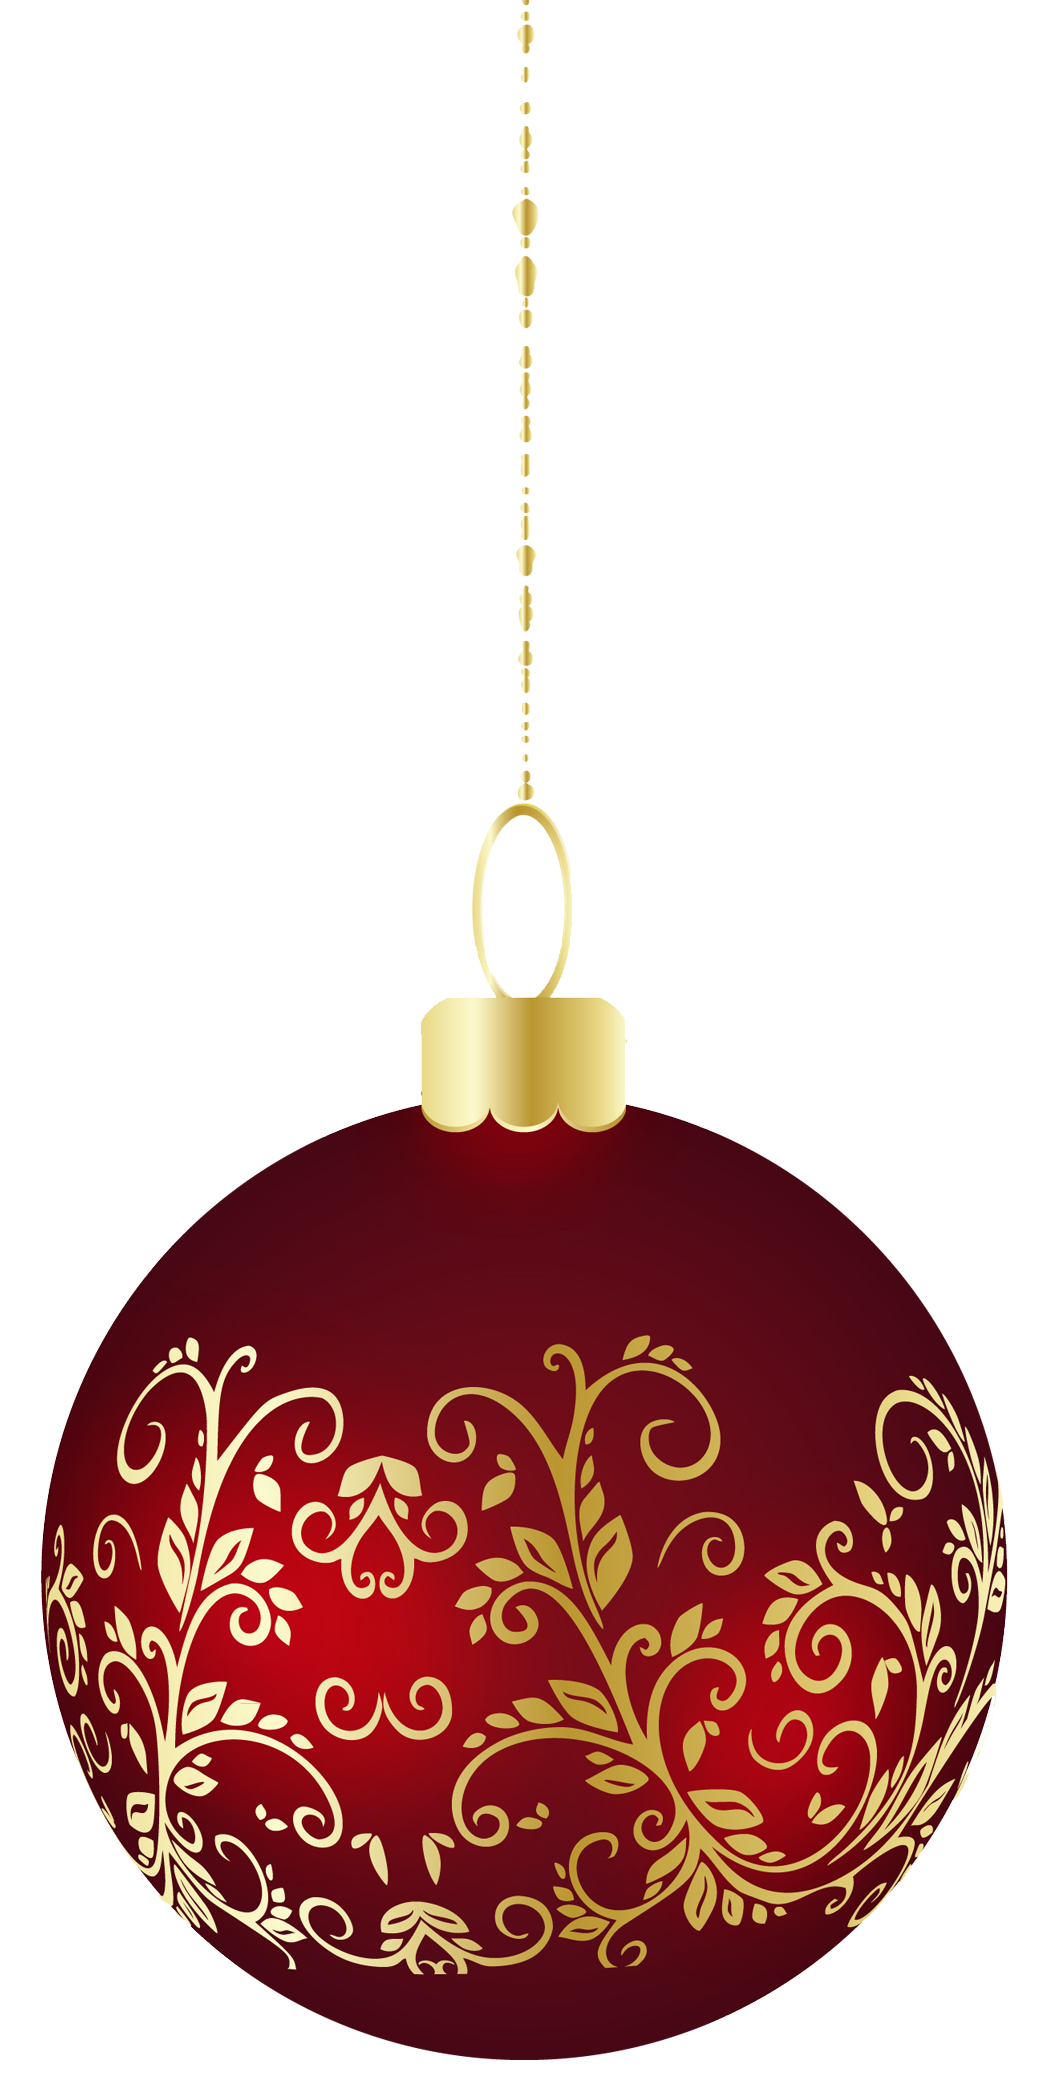 Decorated Christmas Ball PNG Image